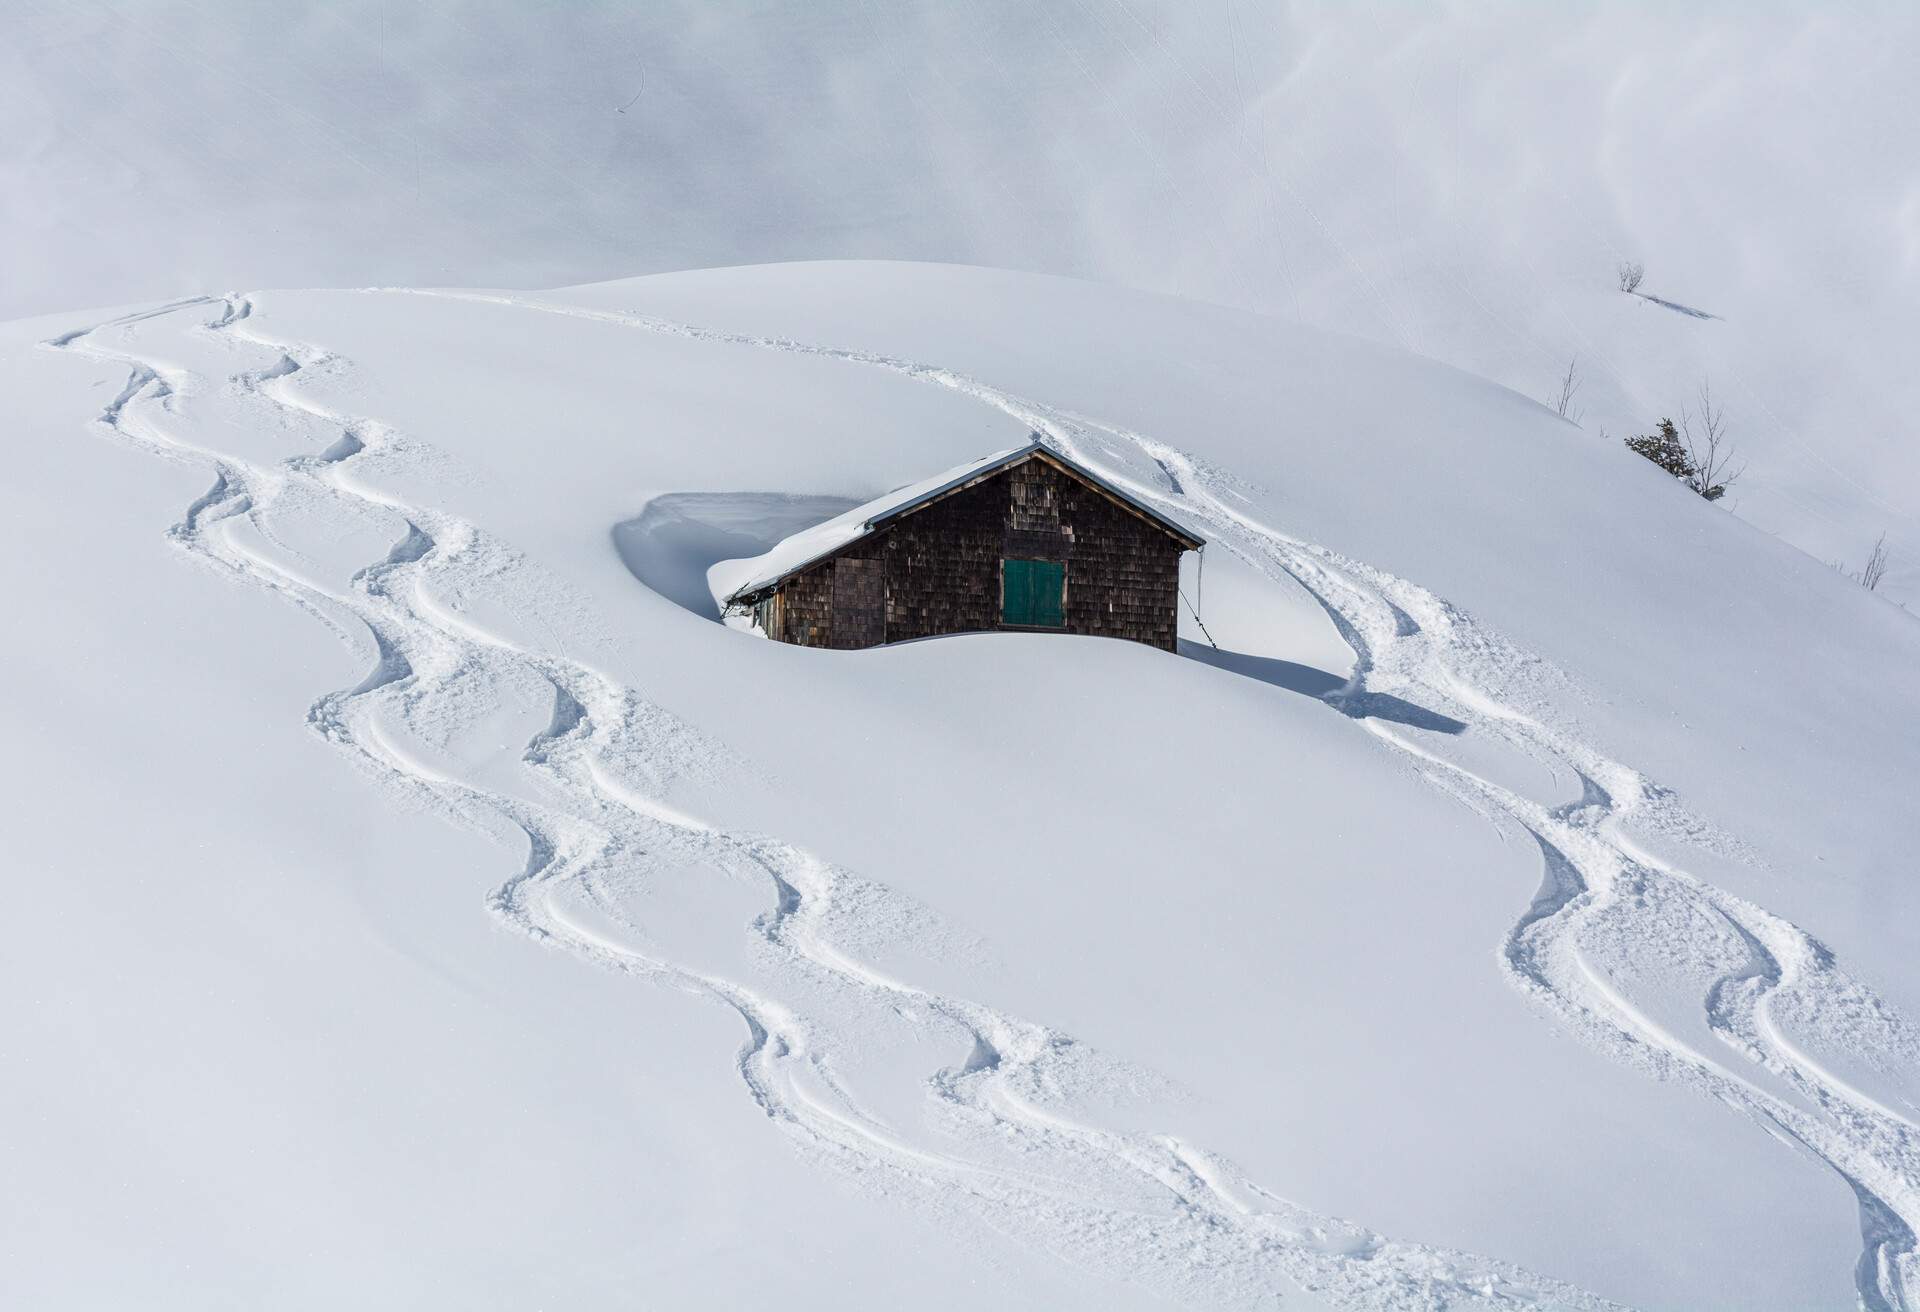 A hillside cabin buried in deep snow with ski tracks.